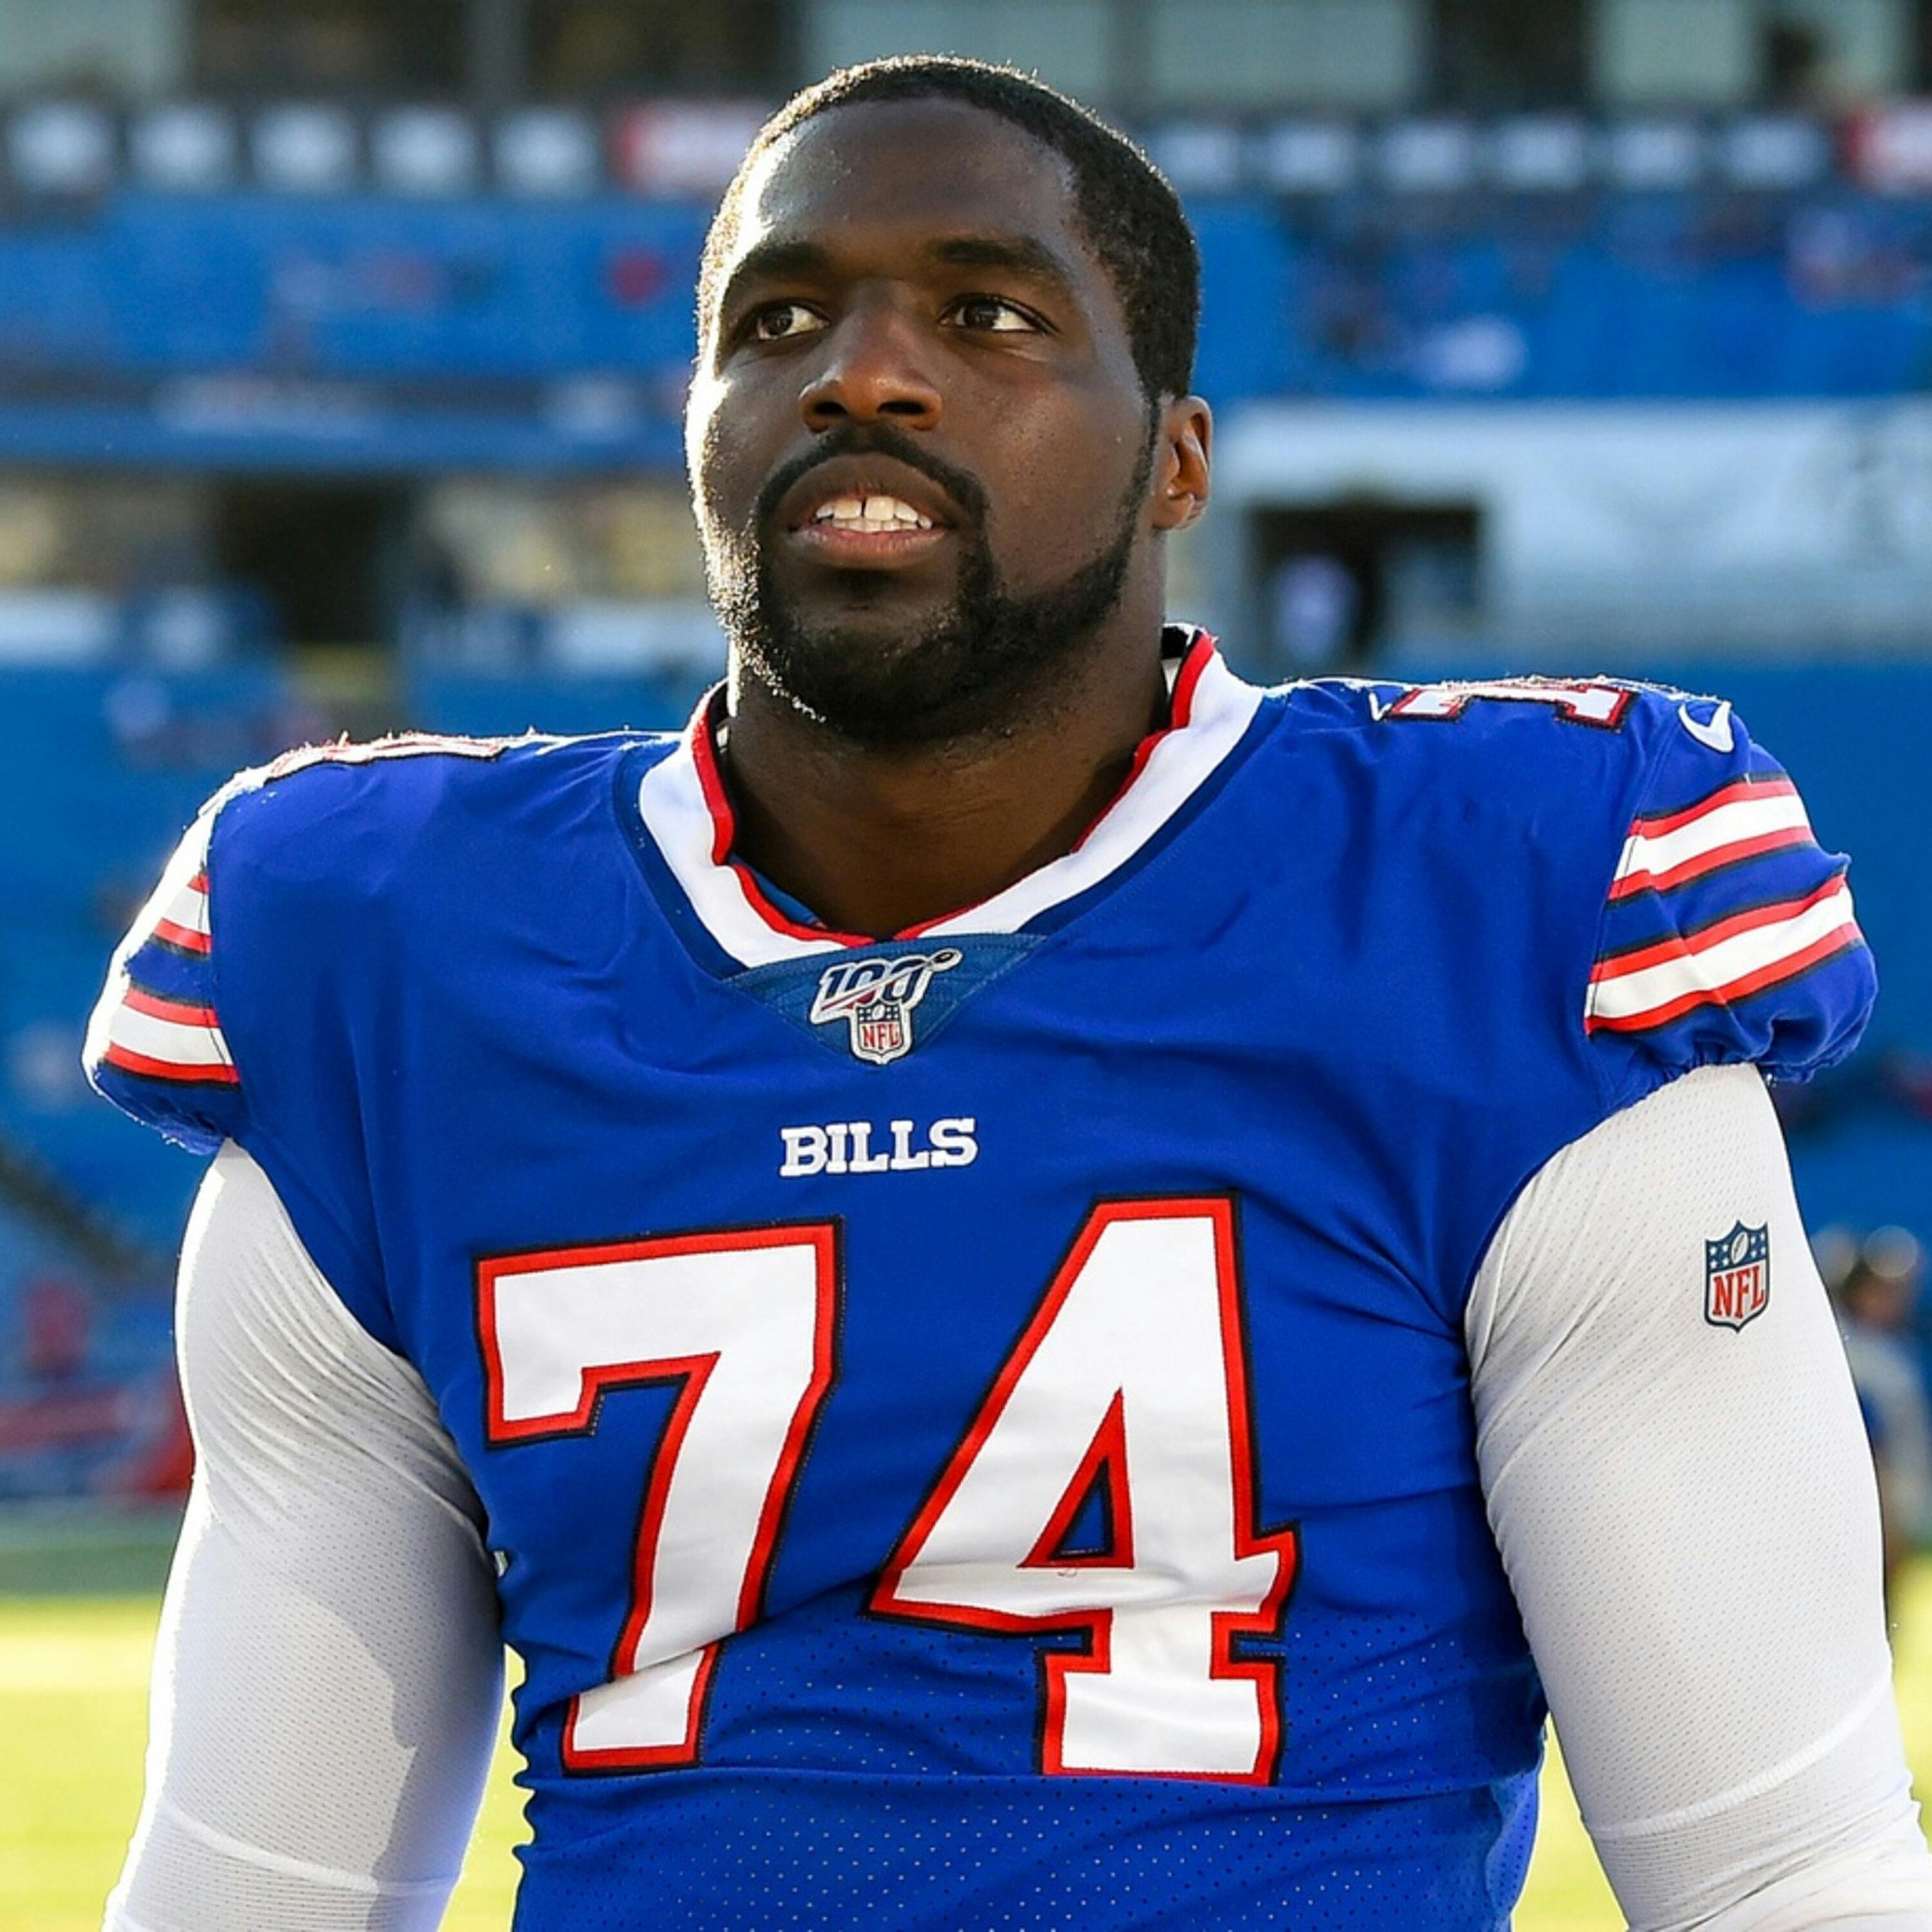 Sam Acho on becoming an author, developing his faith, and more